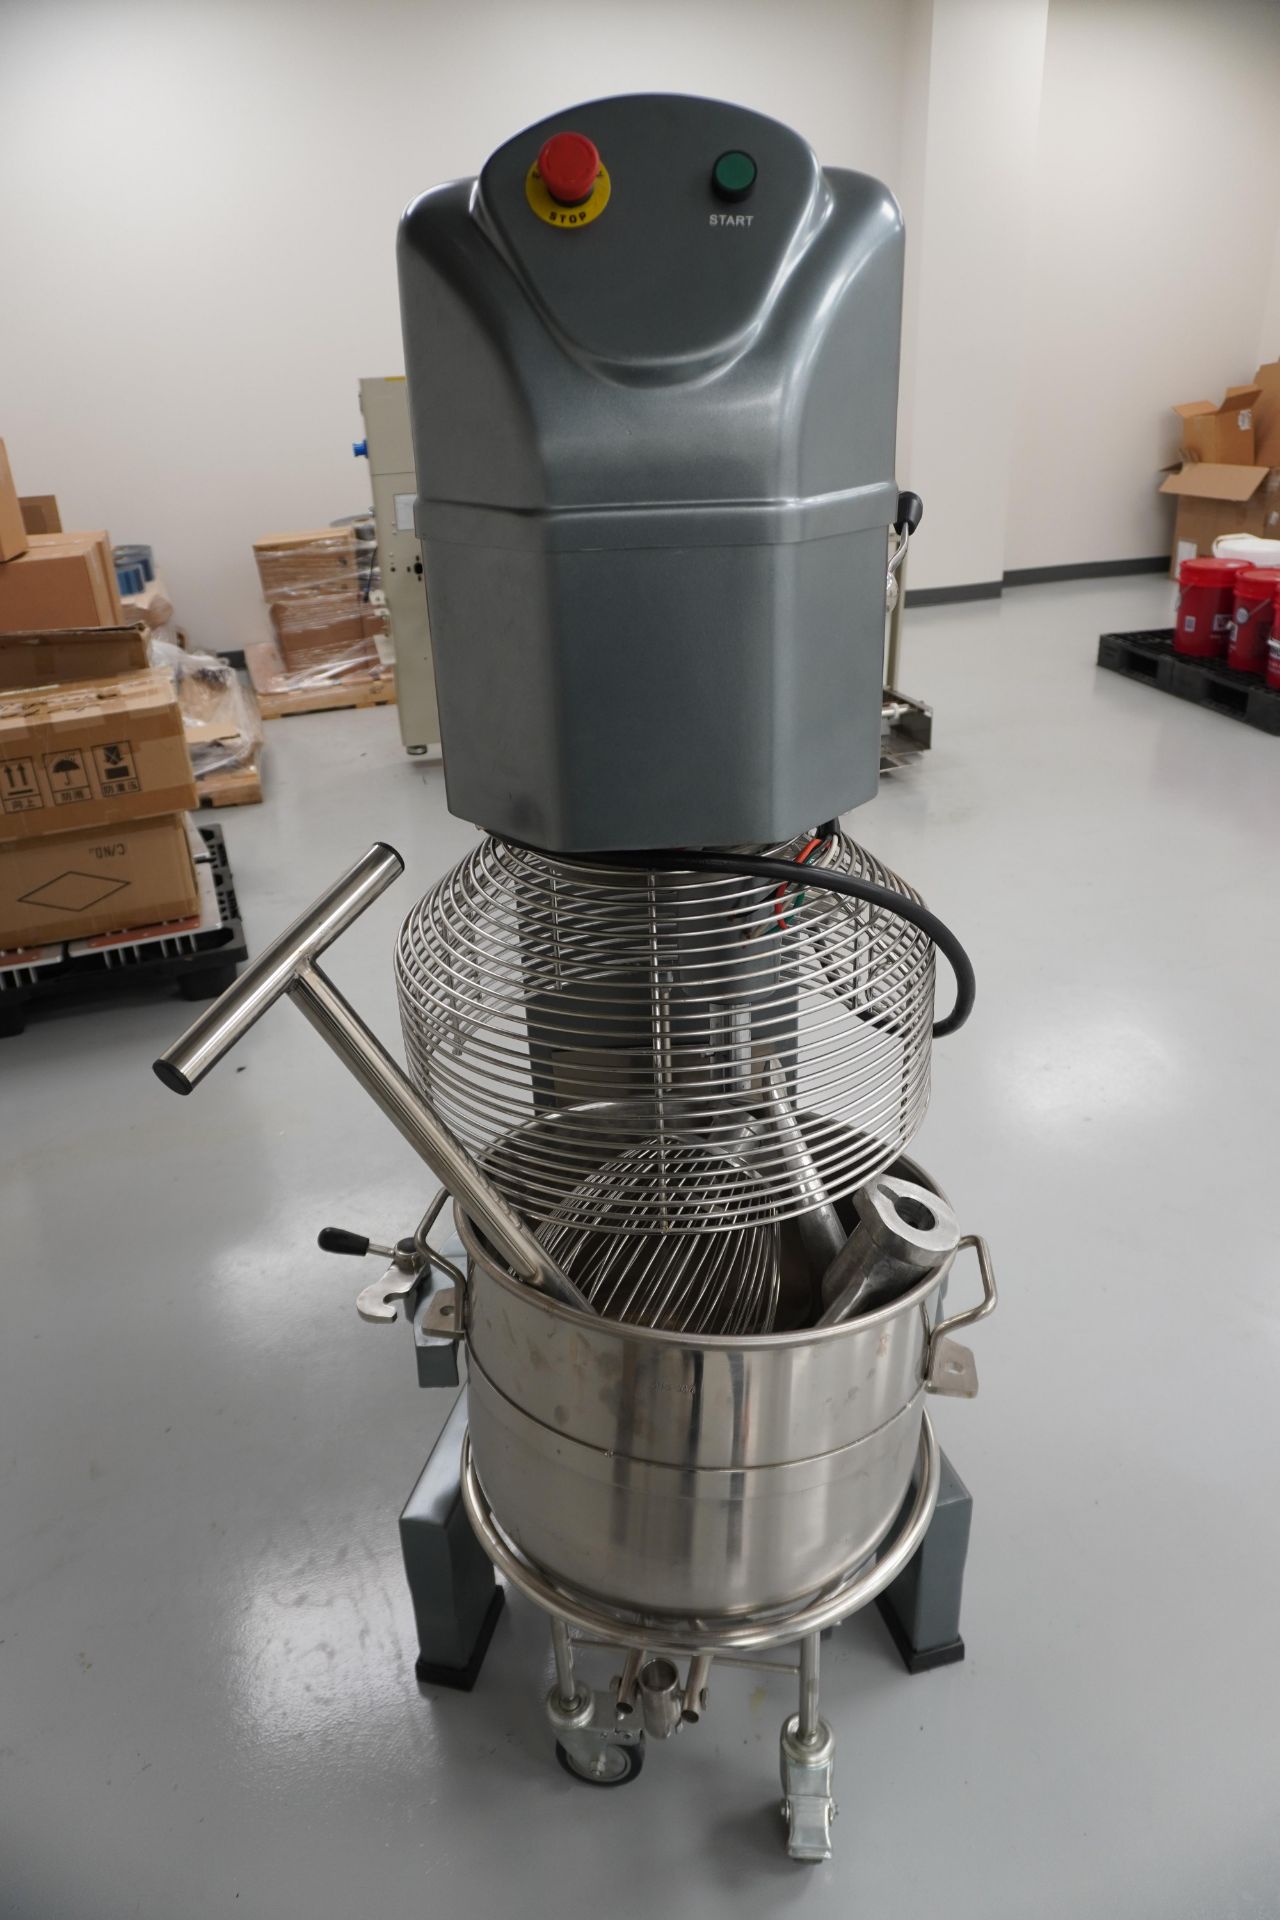 Used Avantco 60 Qt. Planetary Floor Mixer with Guard & Standard Accessories. MX60H - Image 3 of 5